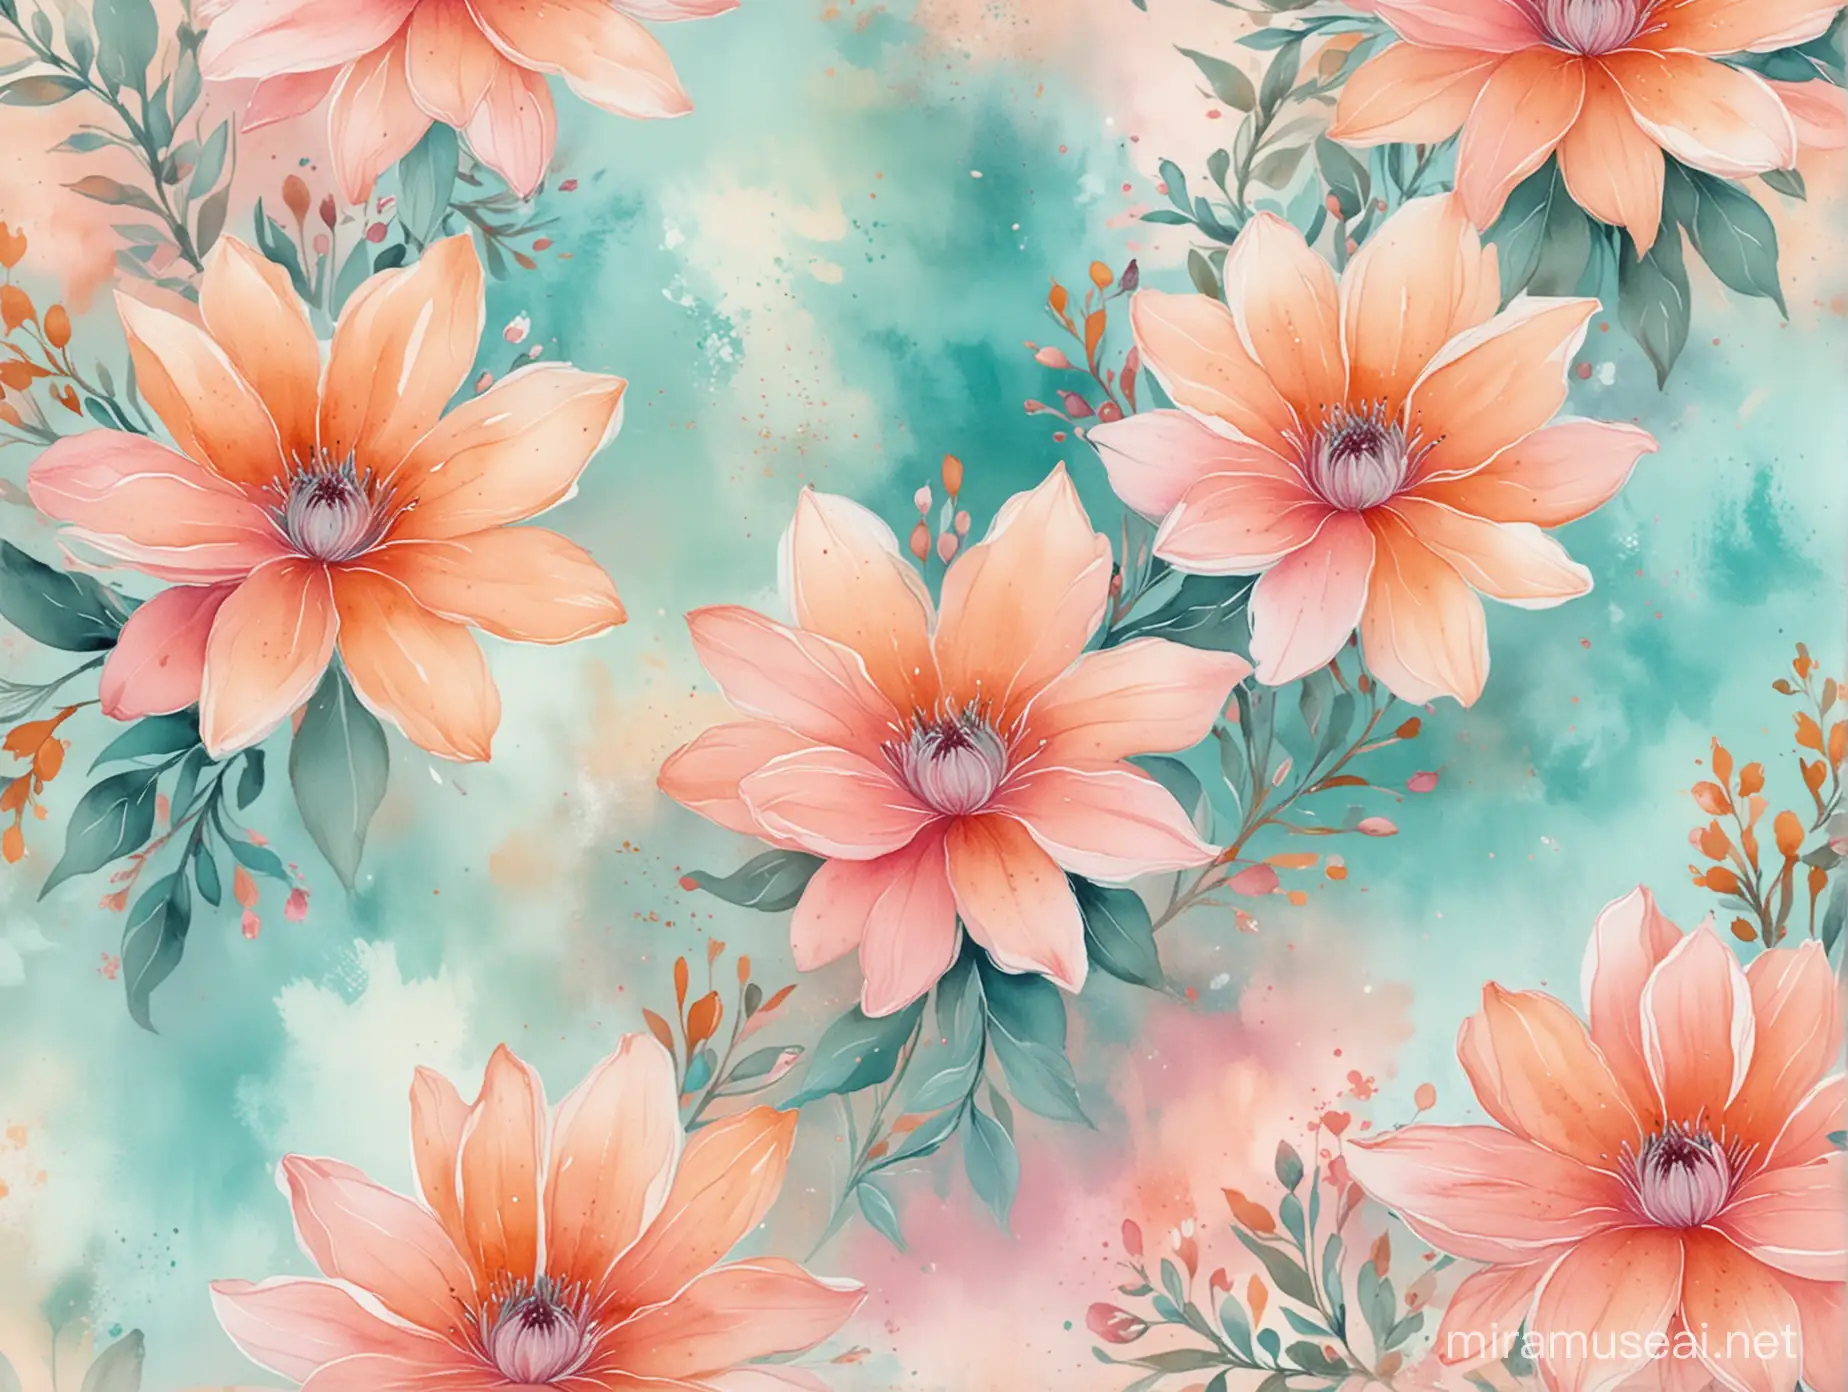 Floral Watercolor Art Smudged Pink Orange and Teal Flowers on Pastel Background